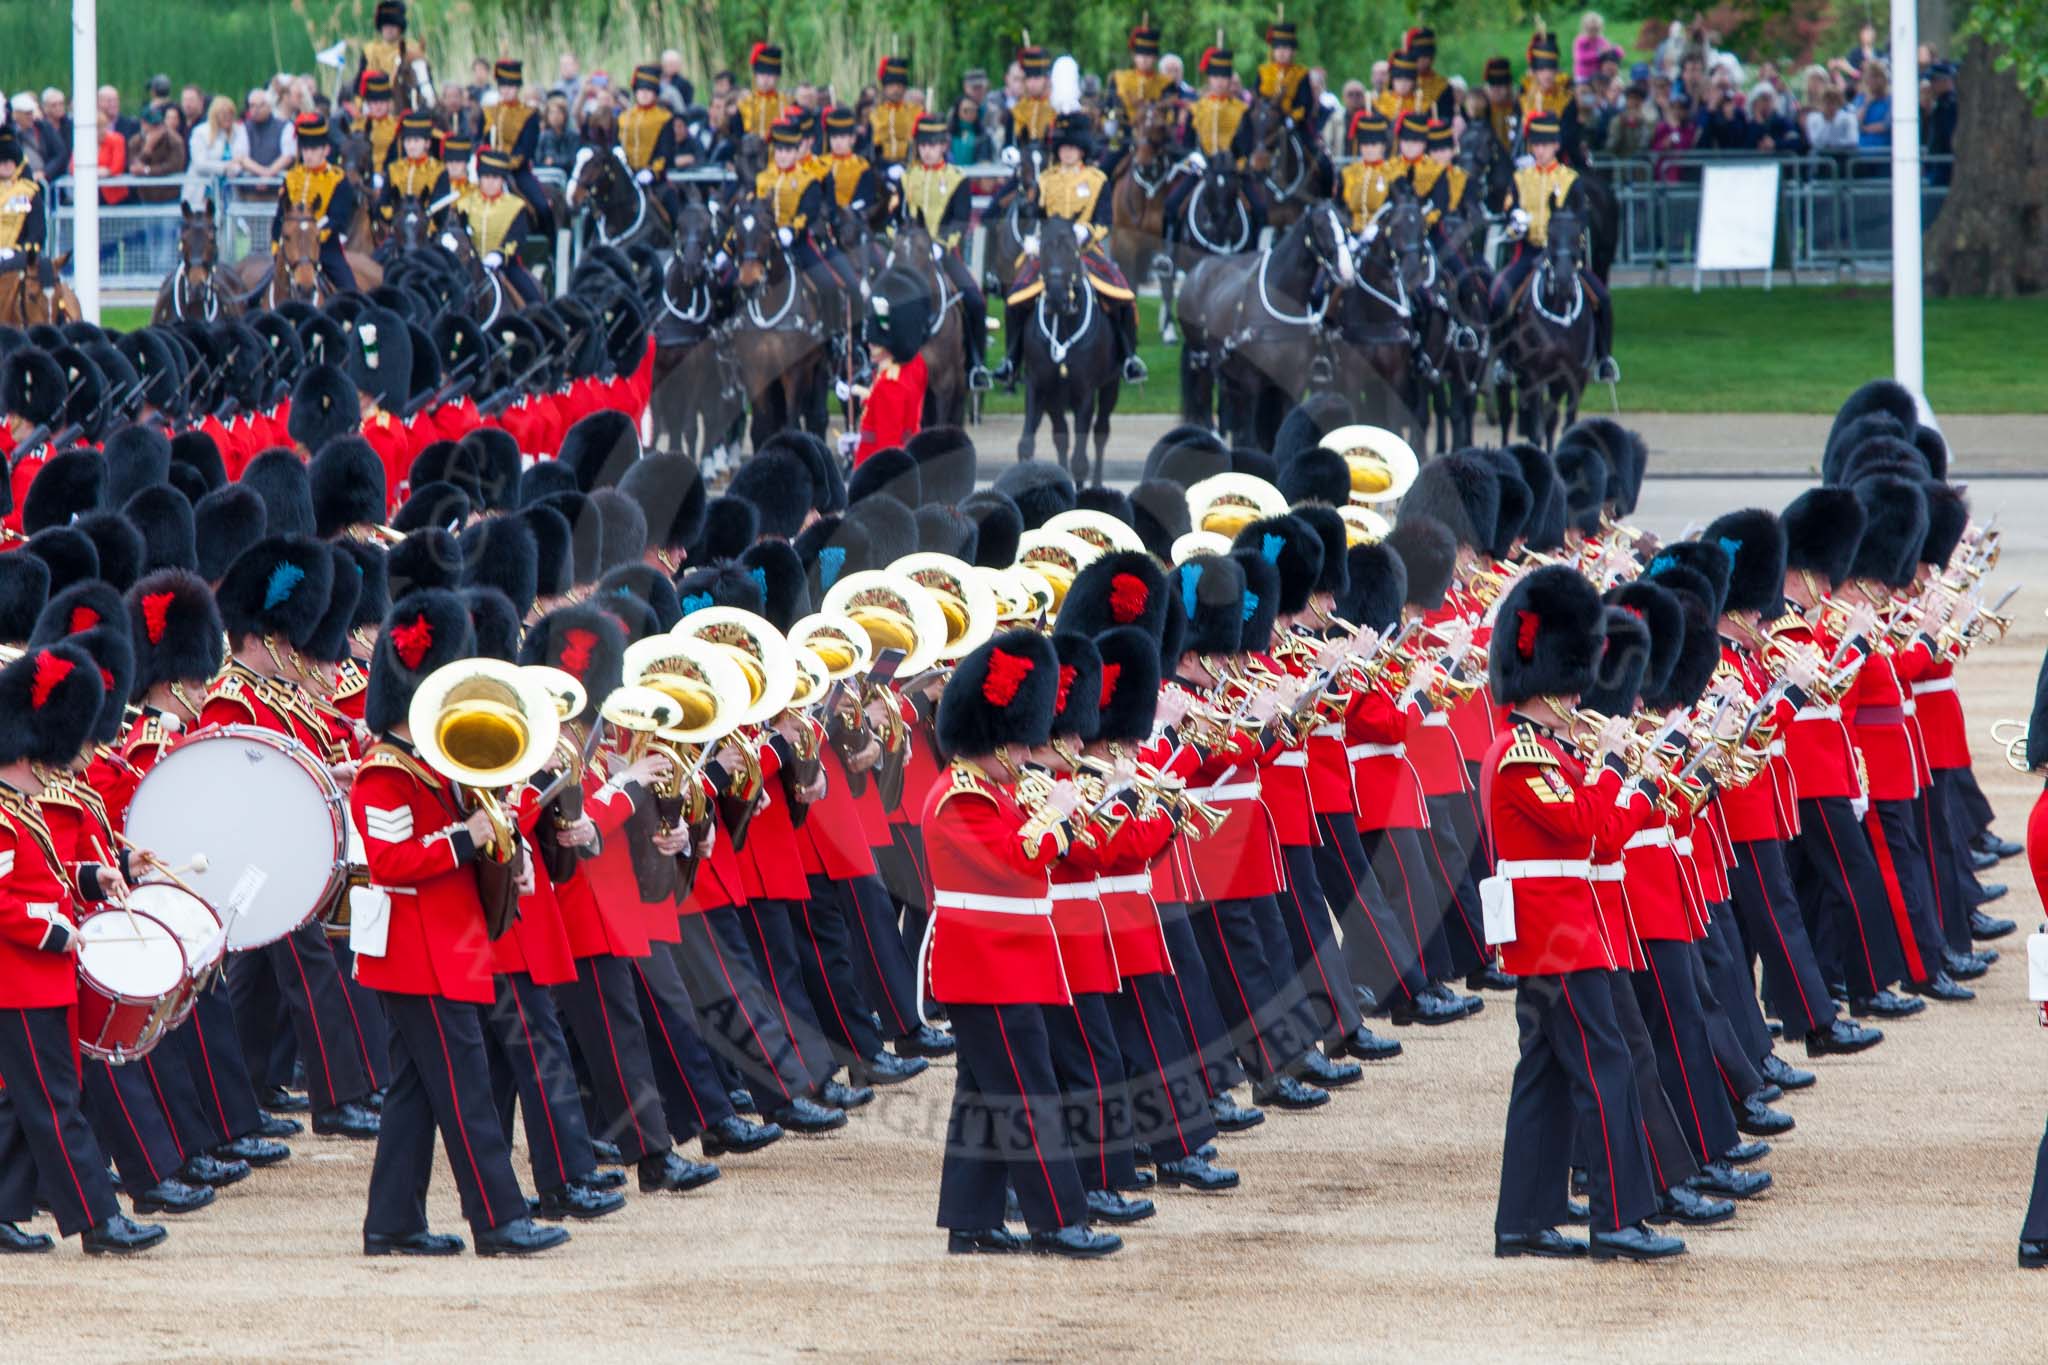 Major General's Review 2013: The Massed Bands, led by the five Drum Majors, during the March Past..
Horse Guards Parade, Westminster,
London SW1,

United Kingdom,
on 01 June 2013 at 11:30, image #458